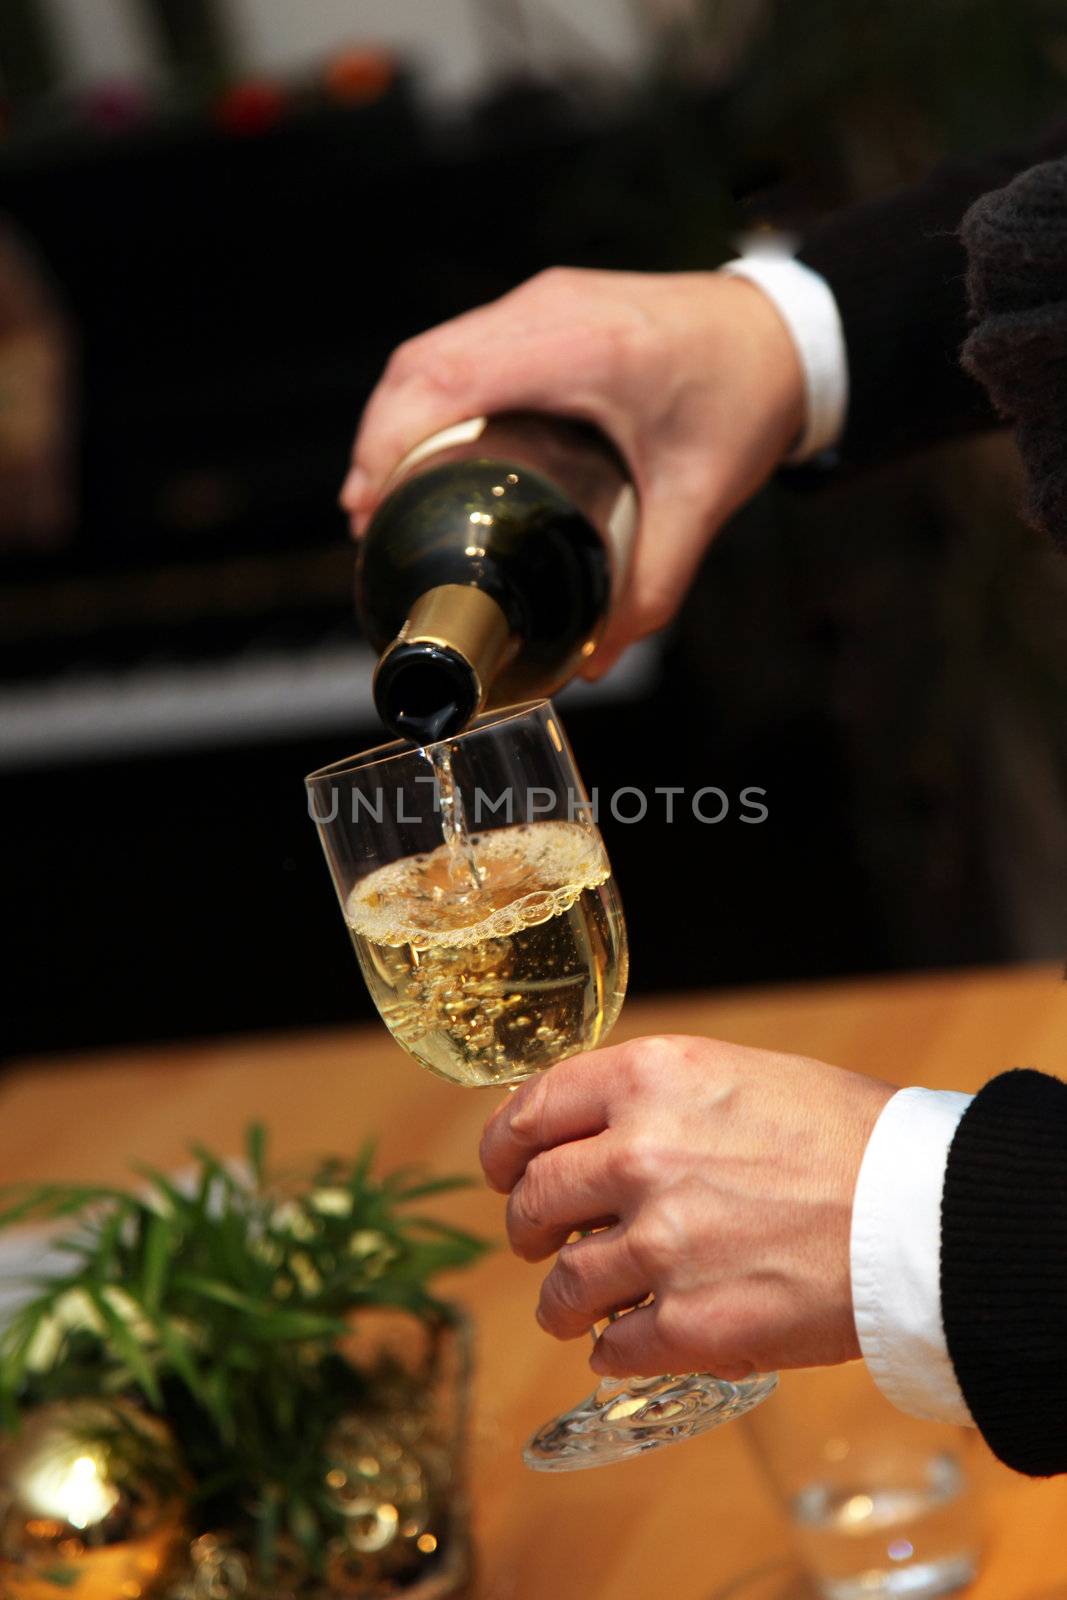 Waiter pours a glass of wine